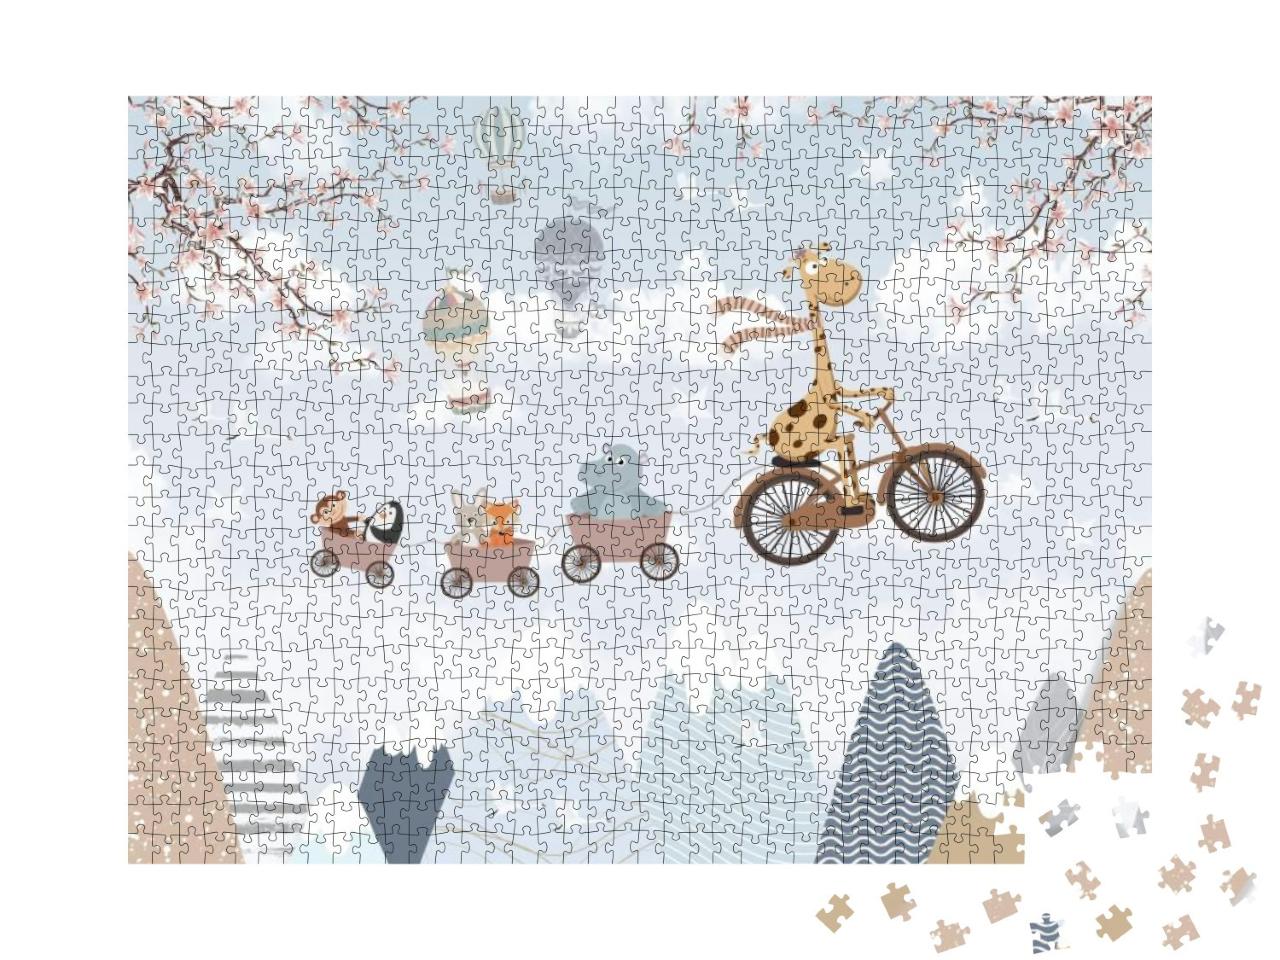 Children's Wallpaper Animals on a Bicycle on a Background... Jigsaw Puzzle with 1000 pieces